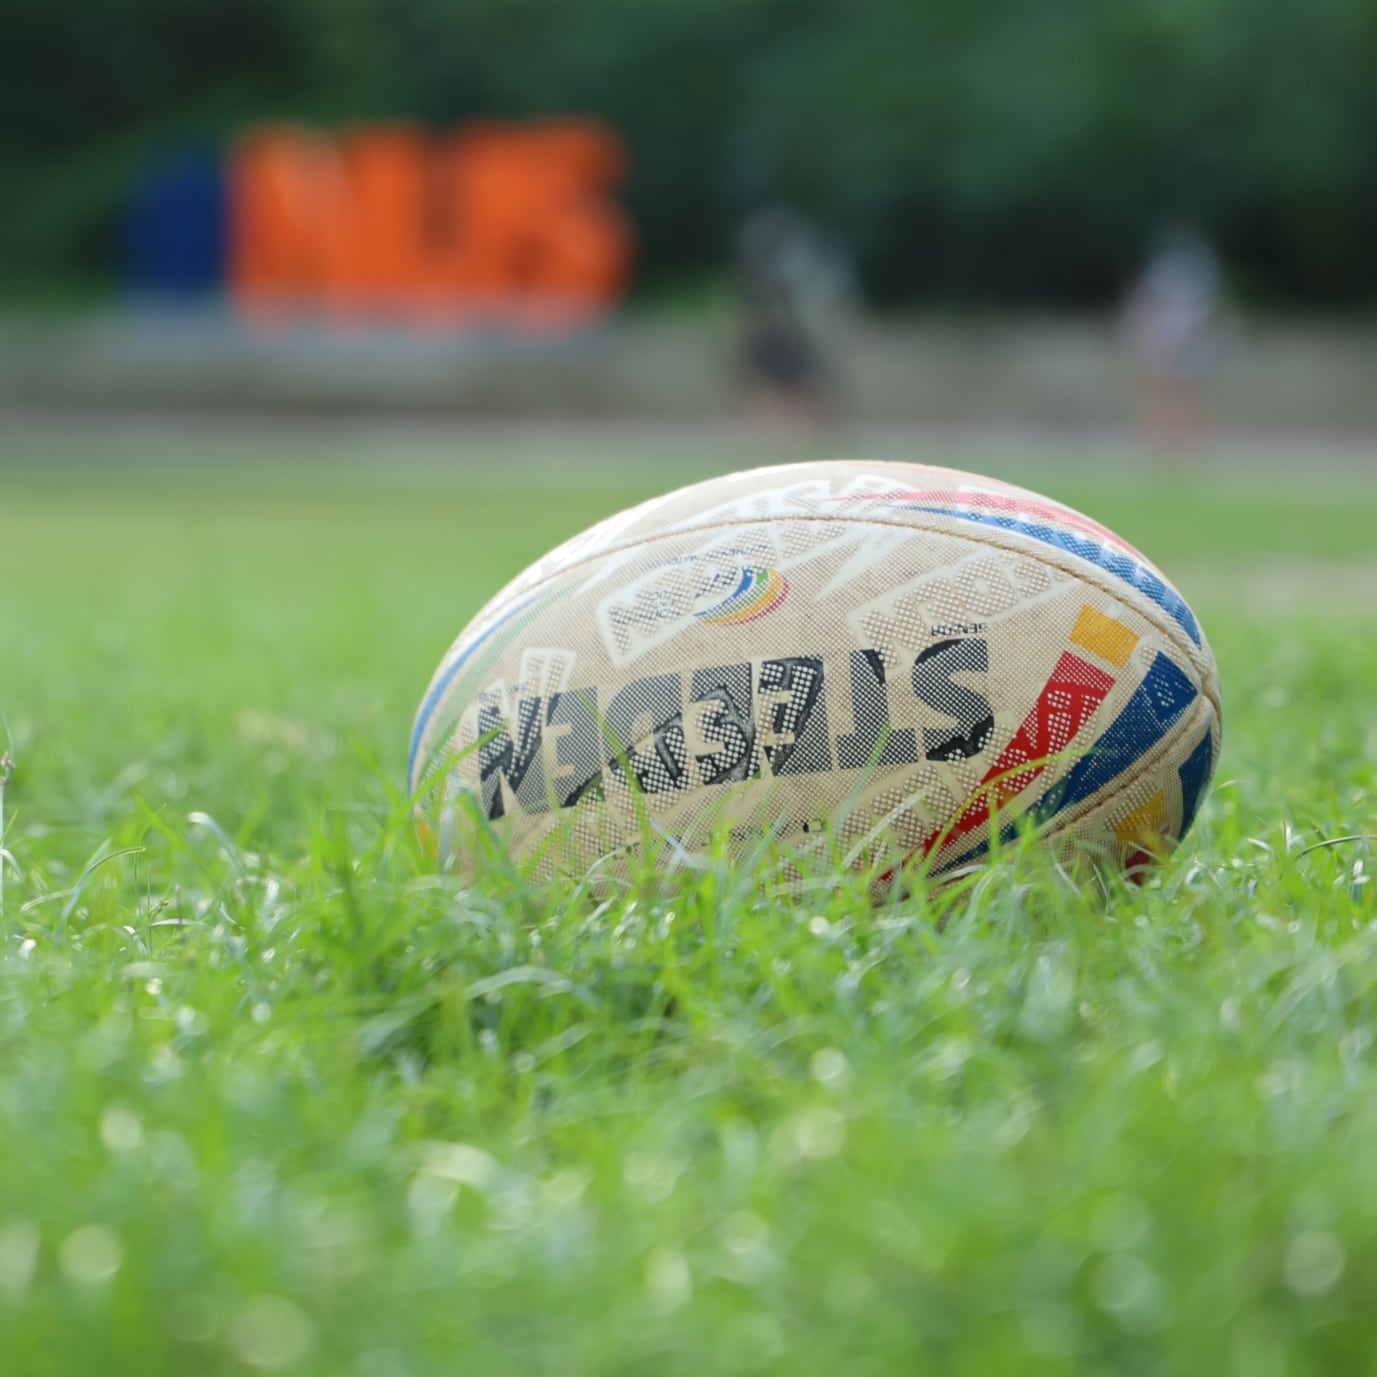 Steeden rugby league ball sitting on the grass